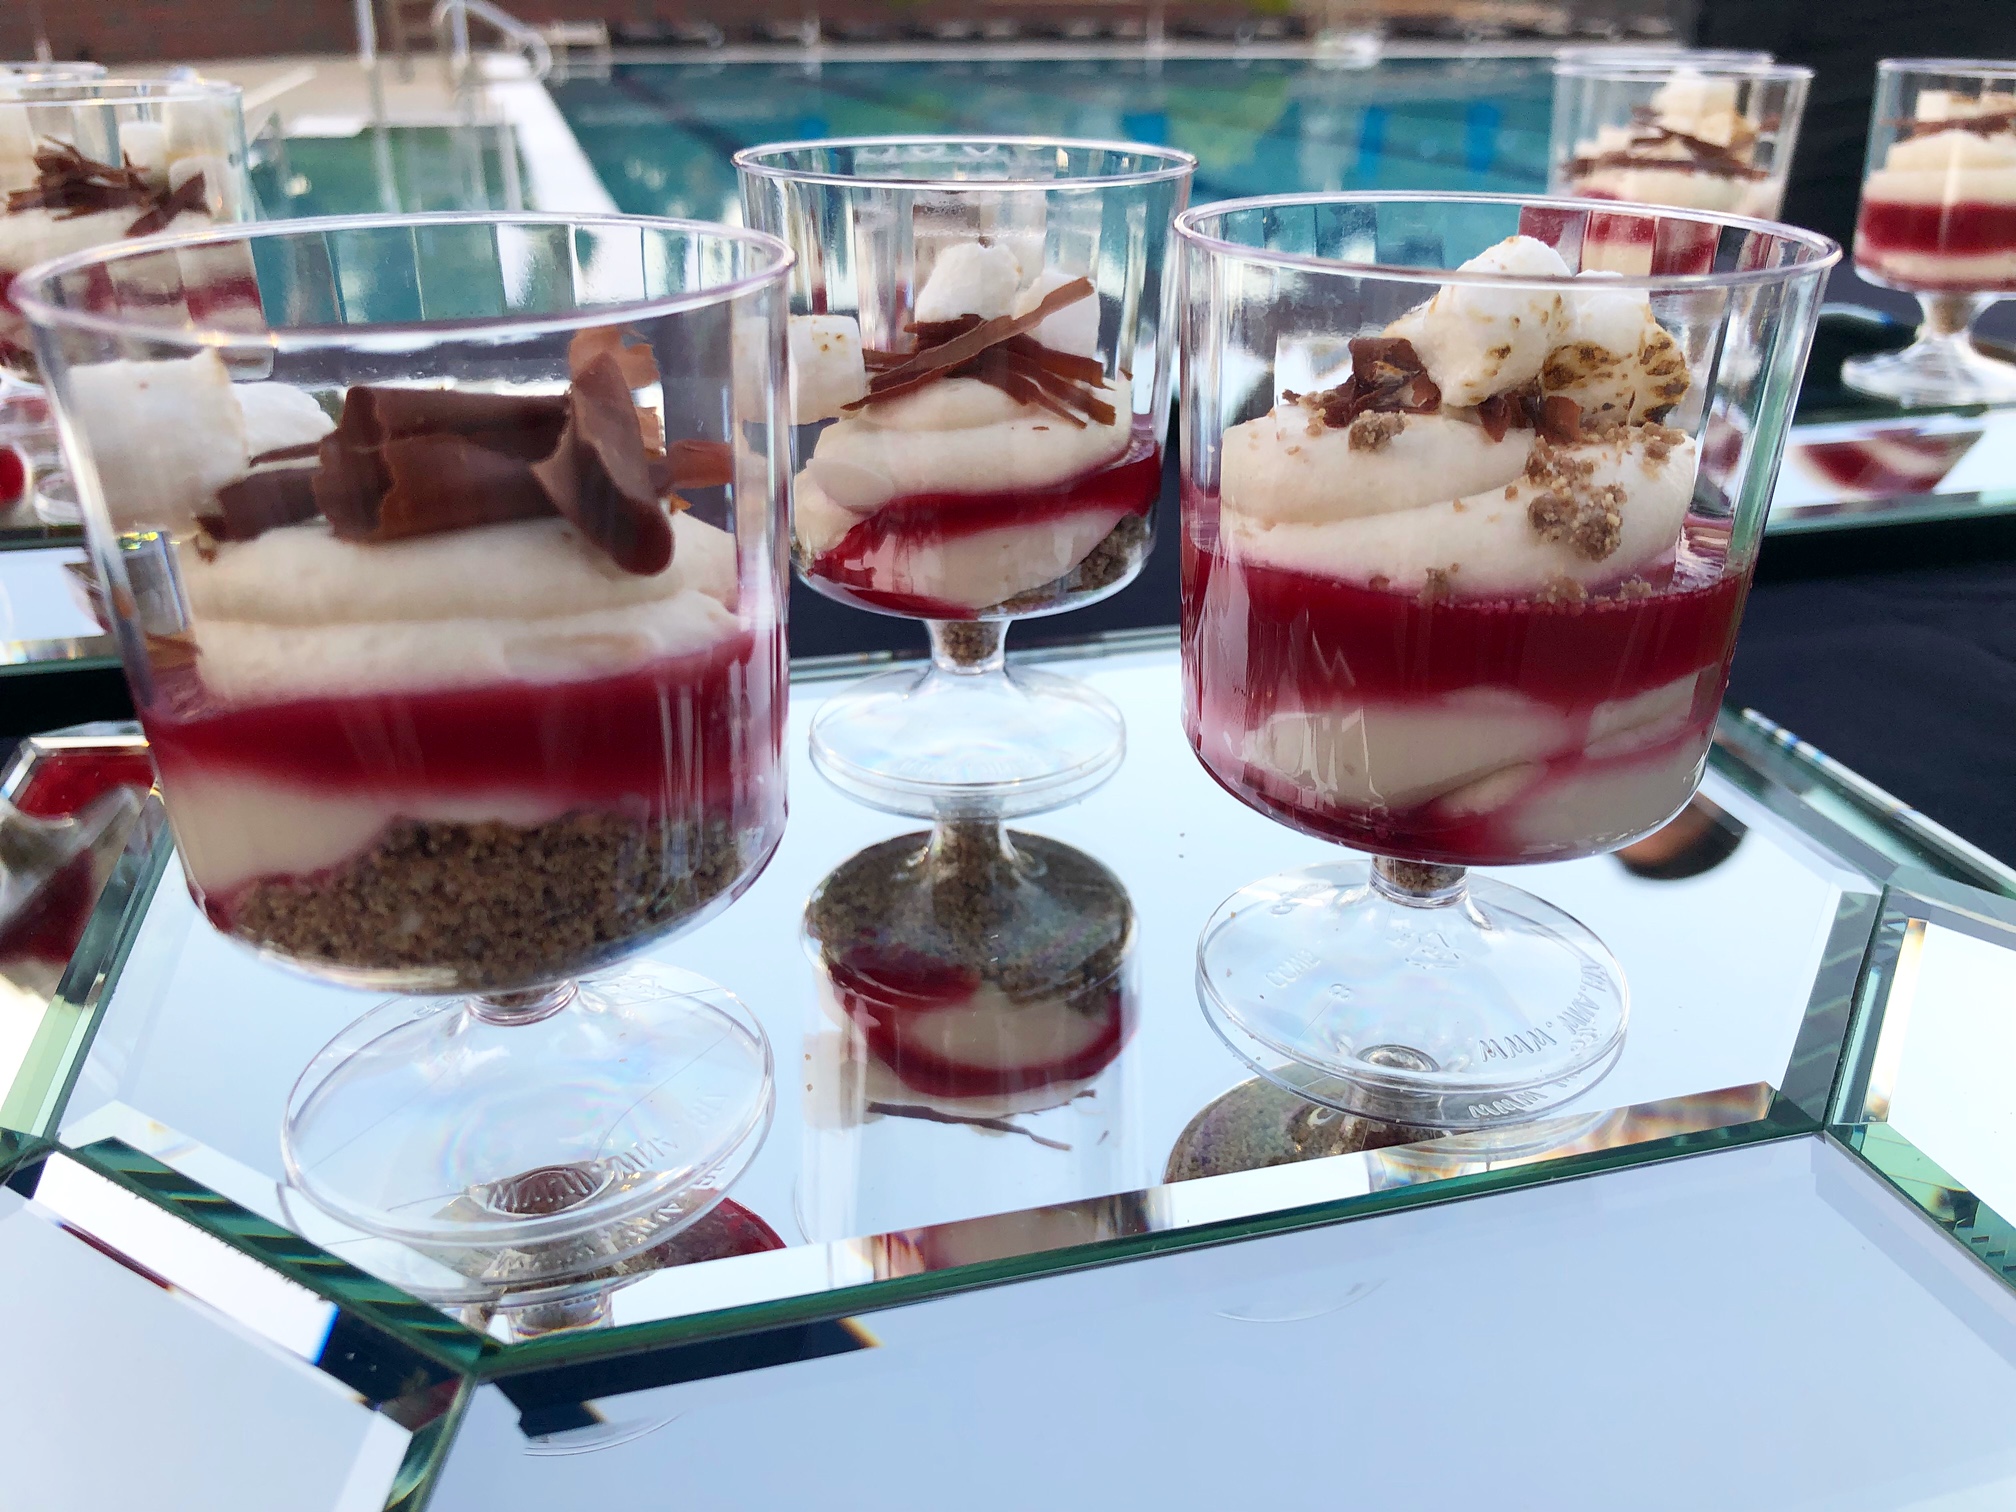 On a hexagon mirror, three strawberry s'more parfaits sit in stemmed glasses. Photo by Alyssa Buckley.